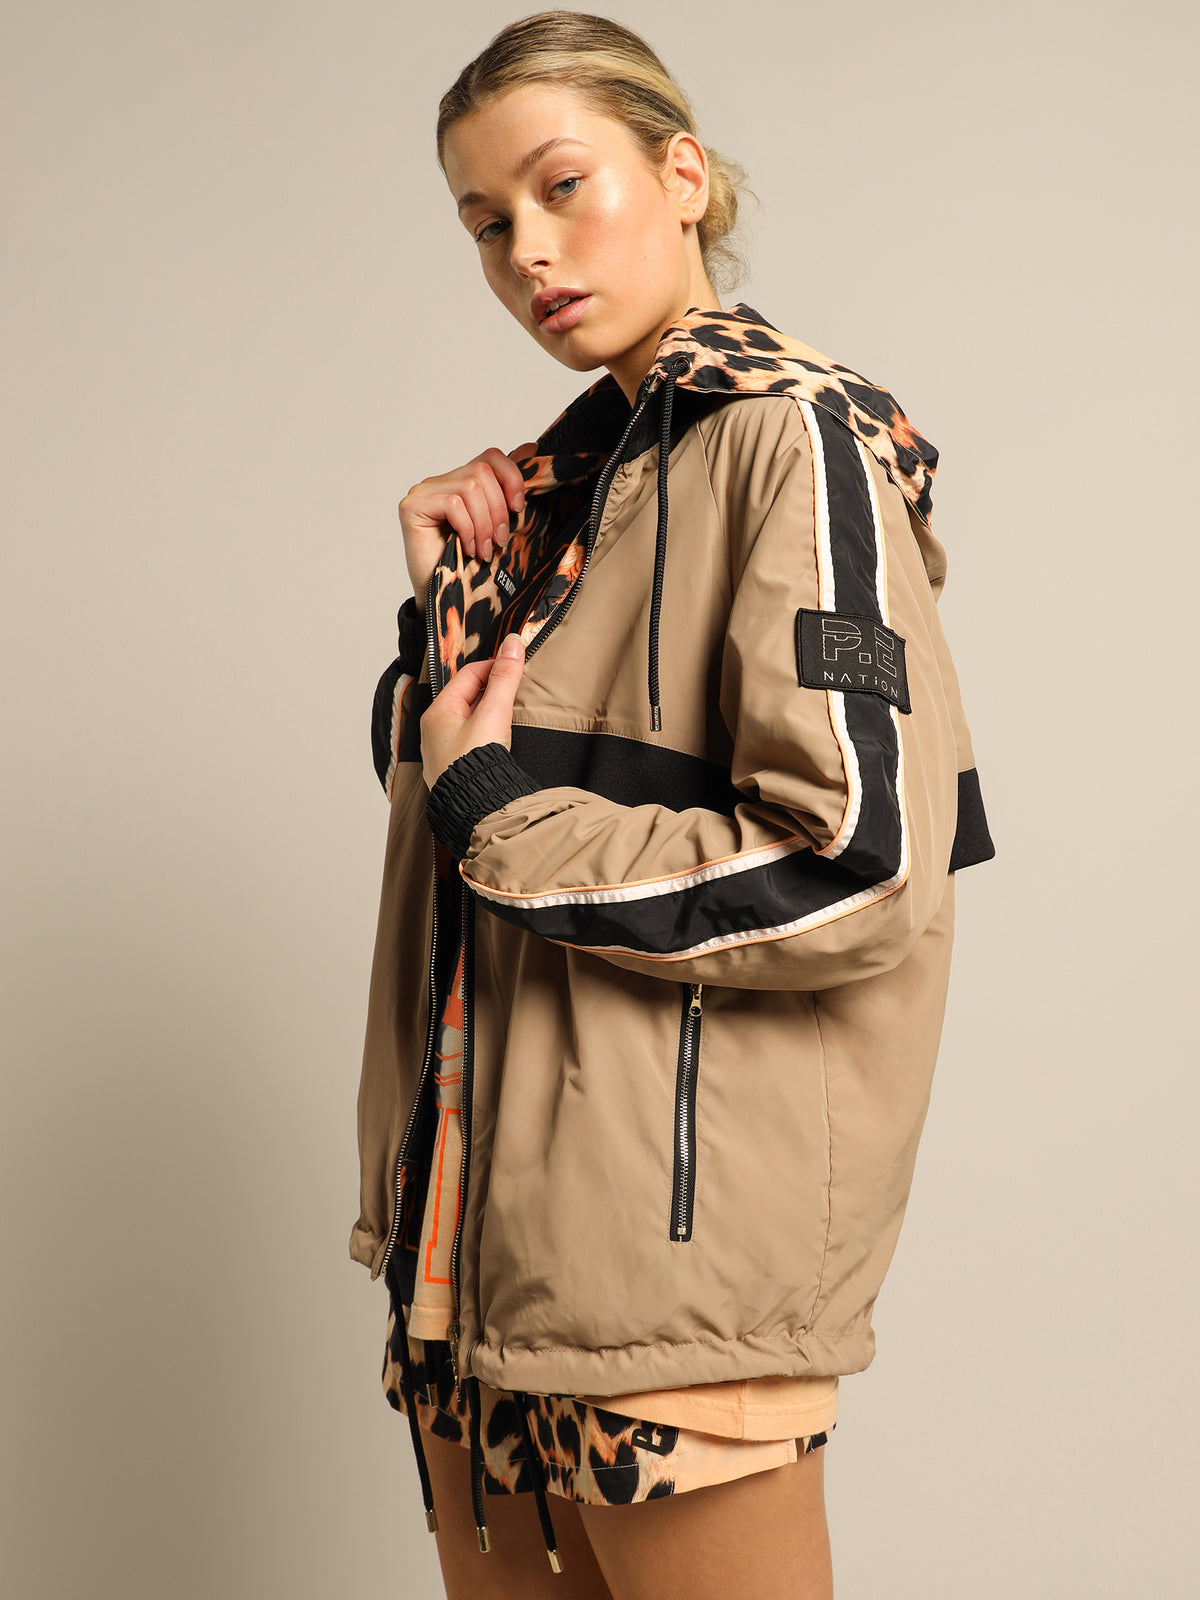 Man Down Reversible Jacket in Nude, Taupe &amp; Leopard Print